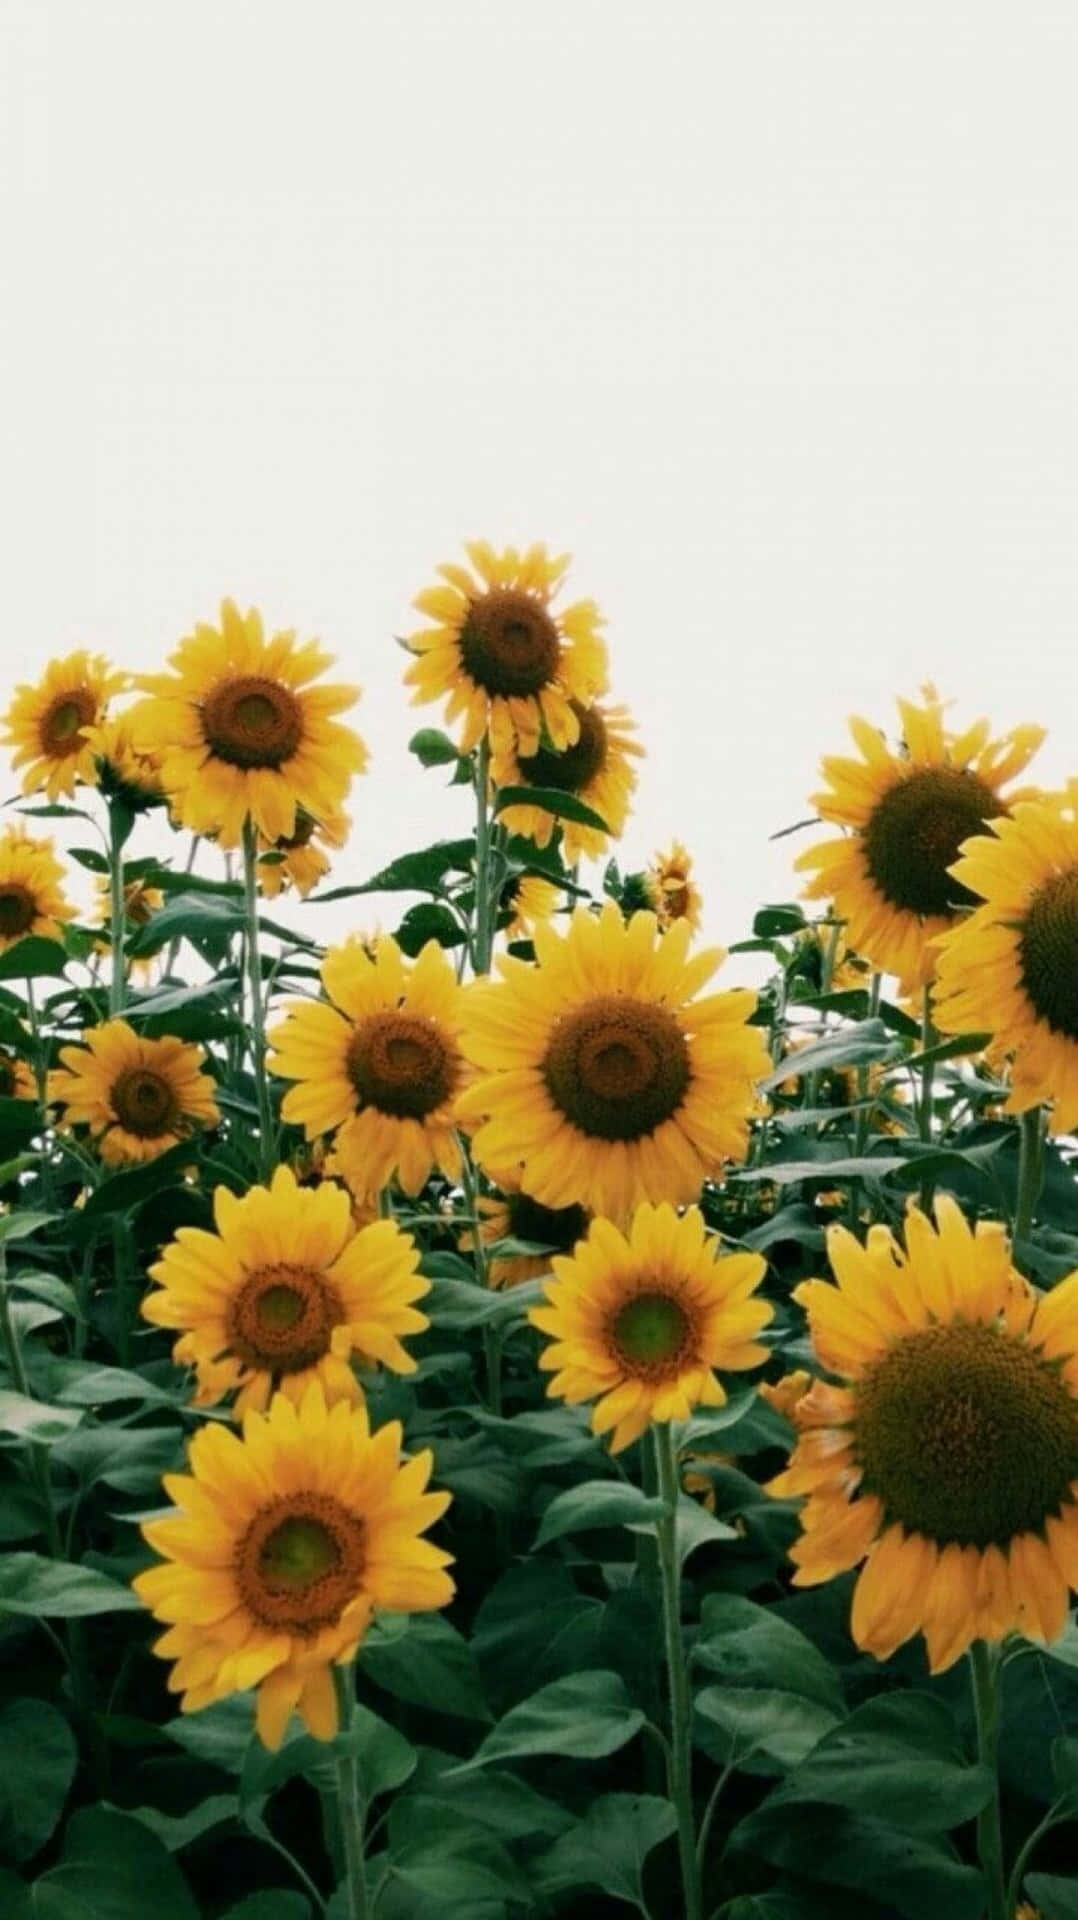 Sunflowers In A Field With A White Background Wallpaper